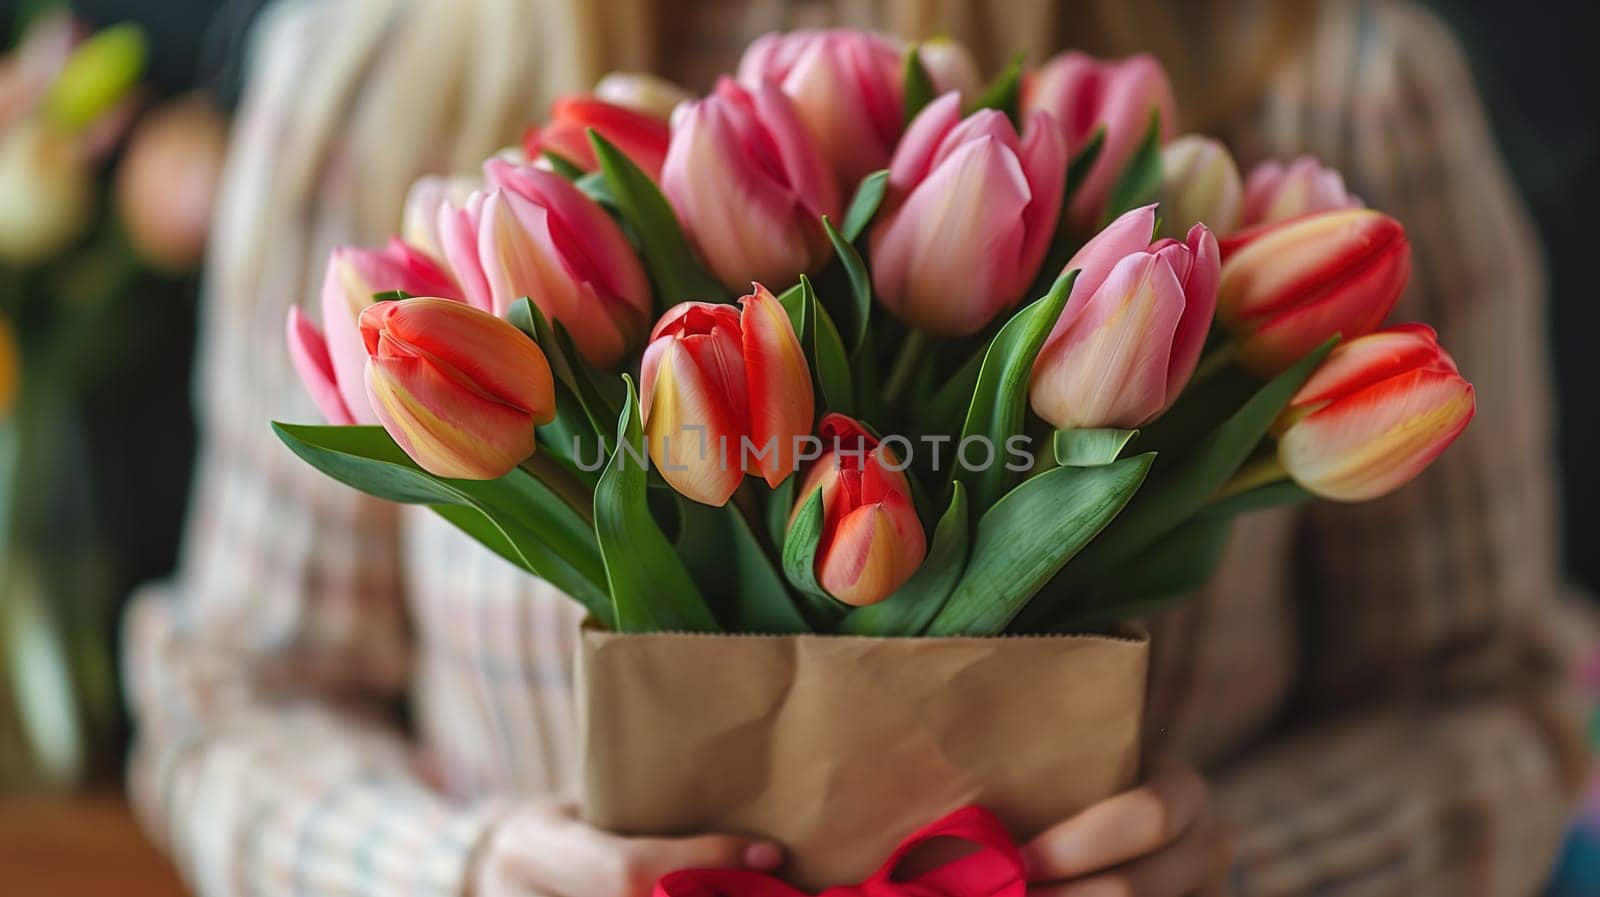 A persons hands holding a vibrant bouquet of tulips, showcasing the colorful flowers with green stems in a close-up view. The individual delicately grasps the bouquet, highlighting the beauty of the fresh tulips.